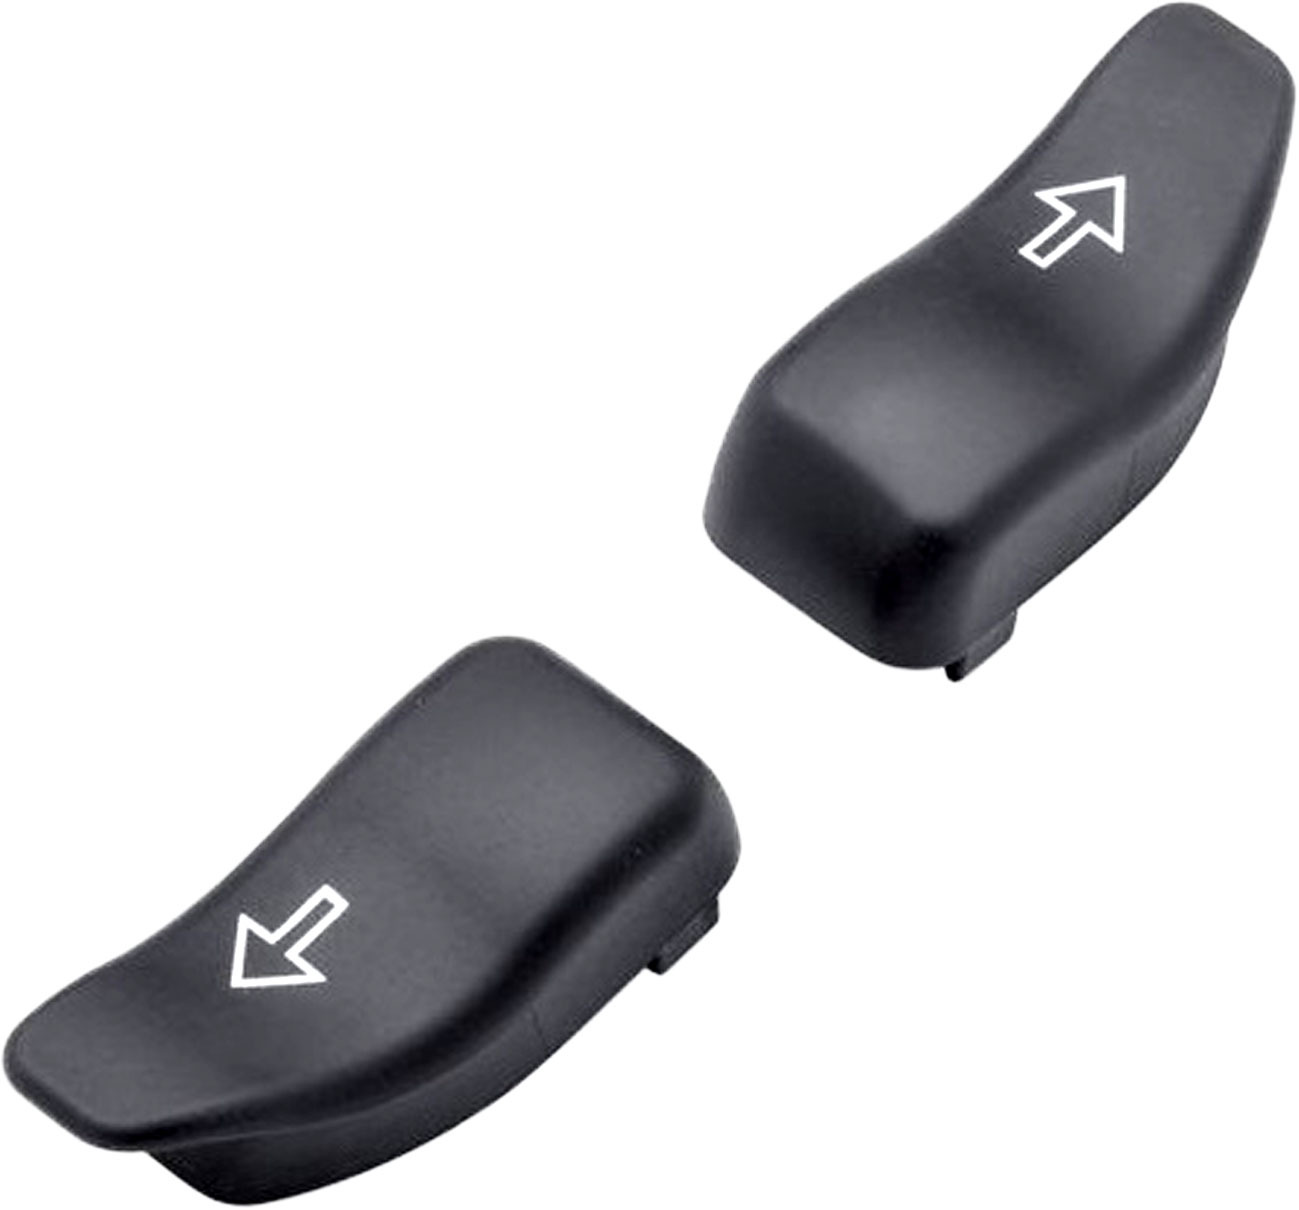 Harddrive - Turn Signal Extention Cap Blk `14-up Road King 19-up Flht - 370927